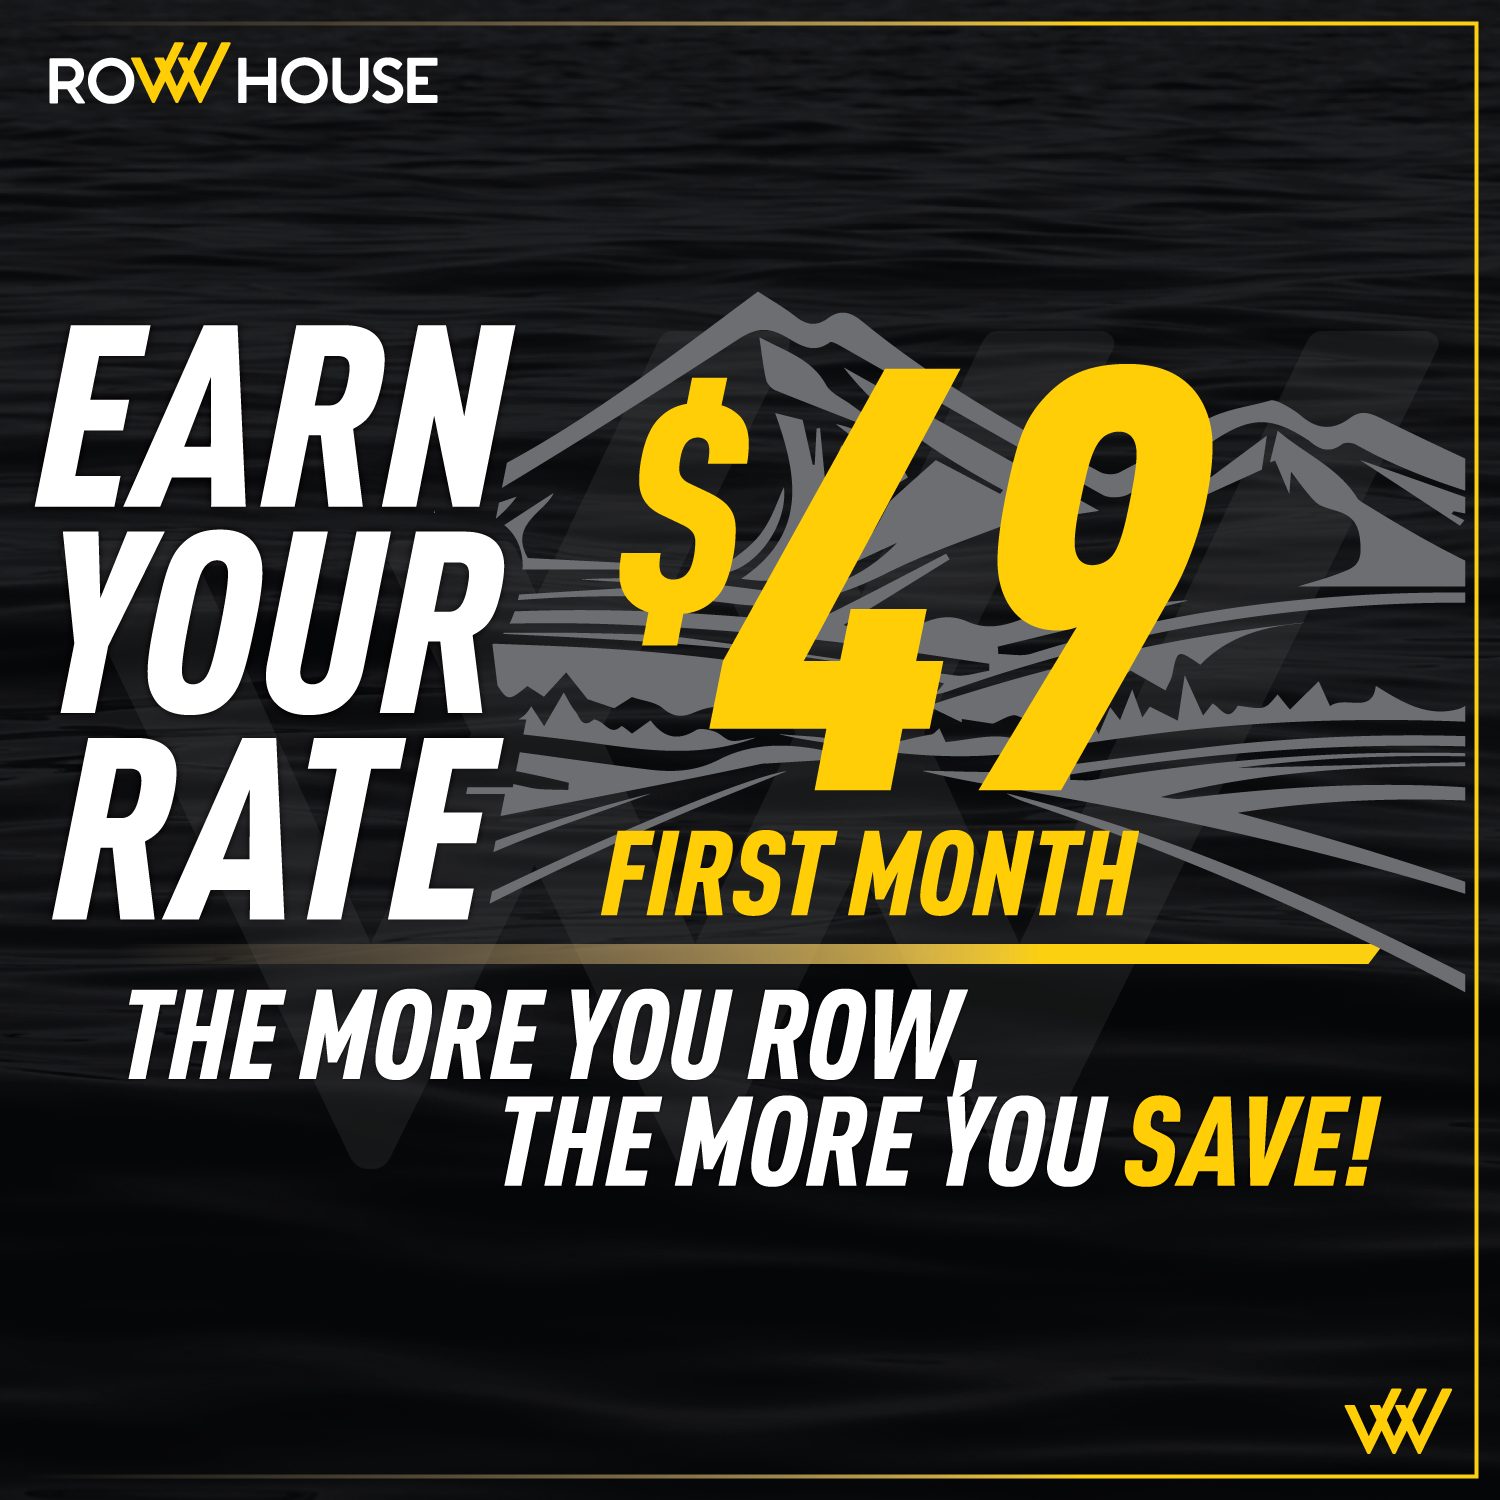 Row House EARN.YOUR.RATE